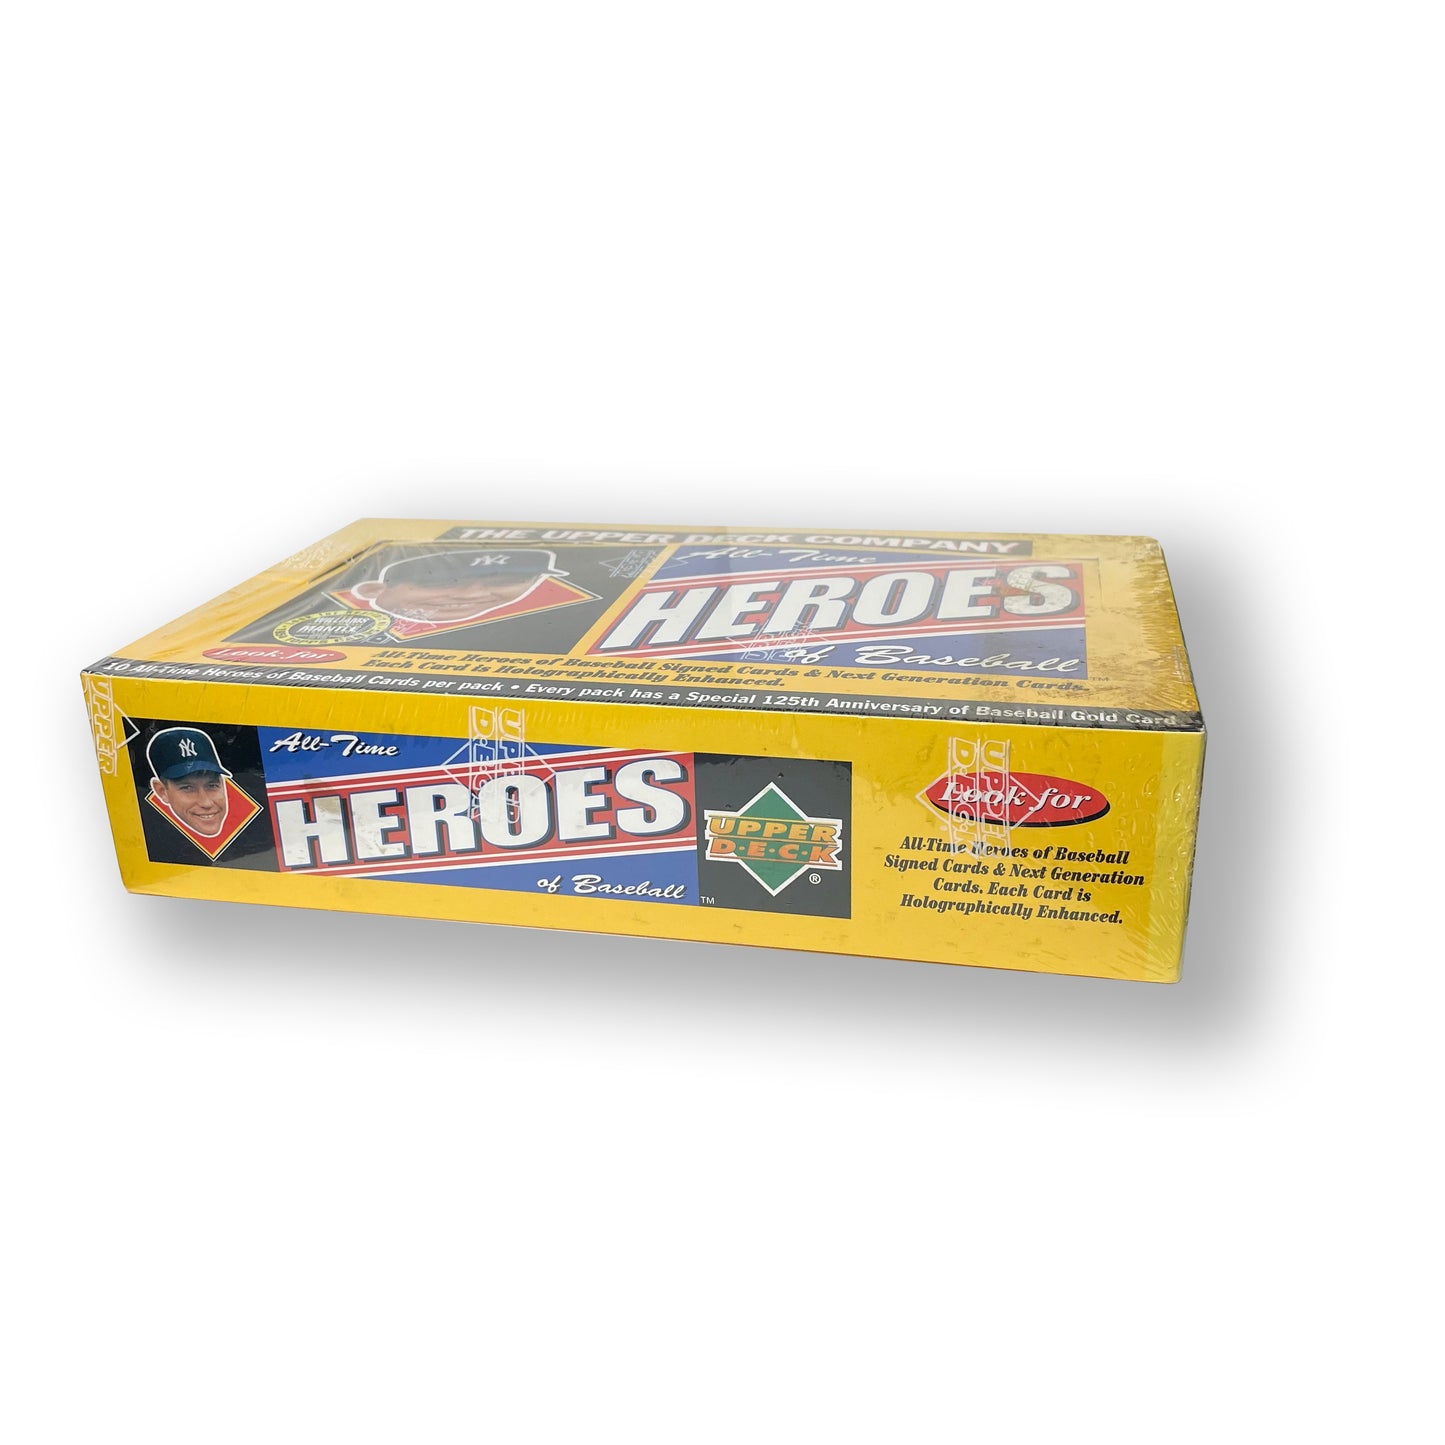 The Upper Deck Company All-Time Heroes of Baseball Box